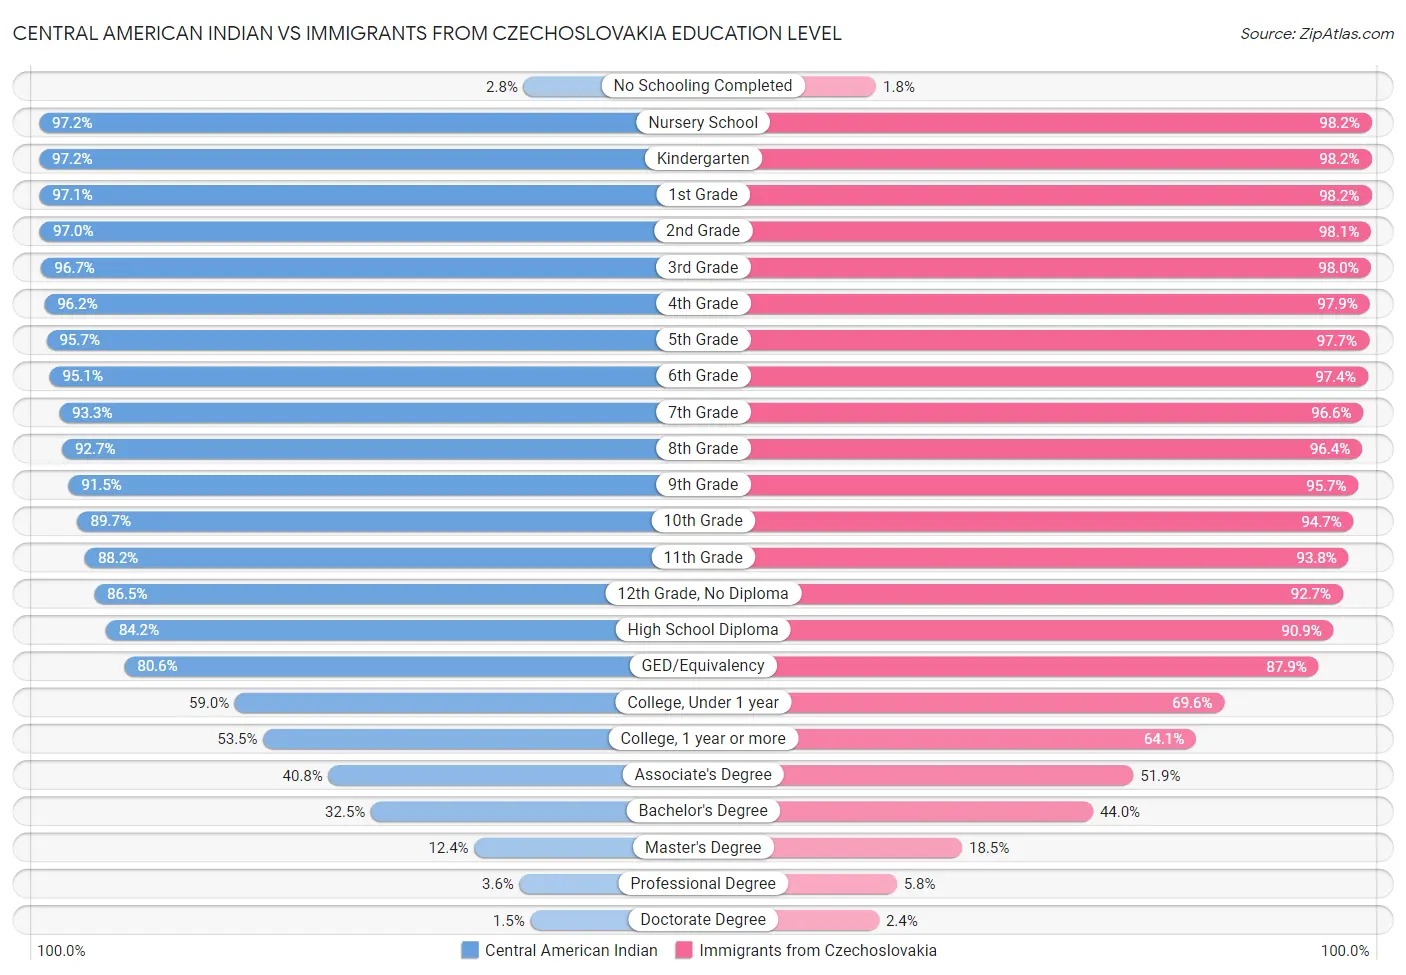 Central American Indian vs Immigrants from Czechoslovakia Education Level